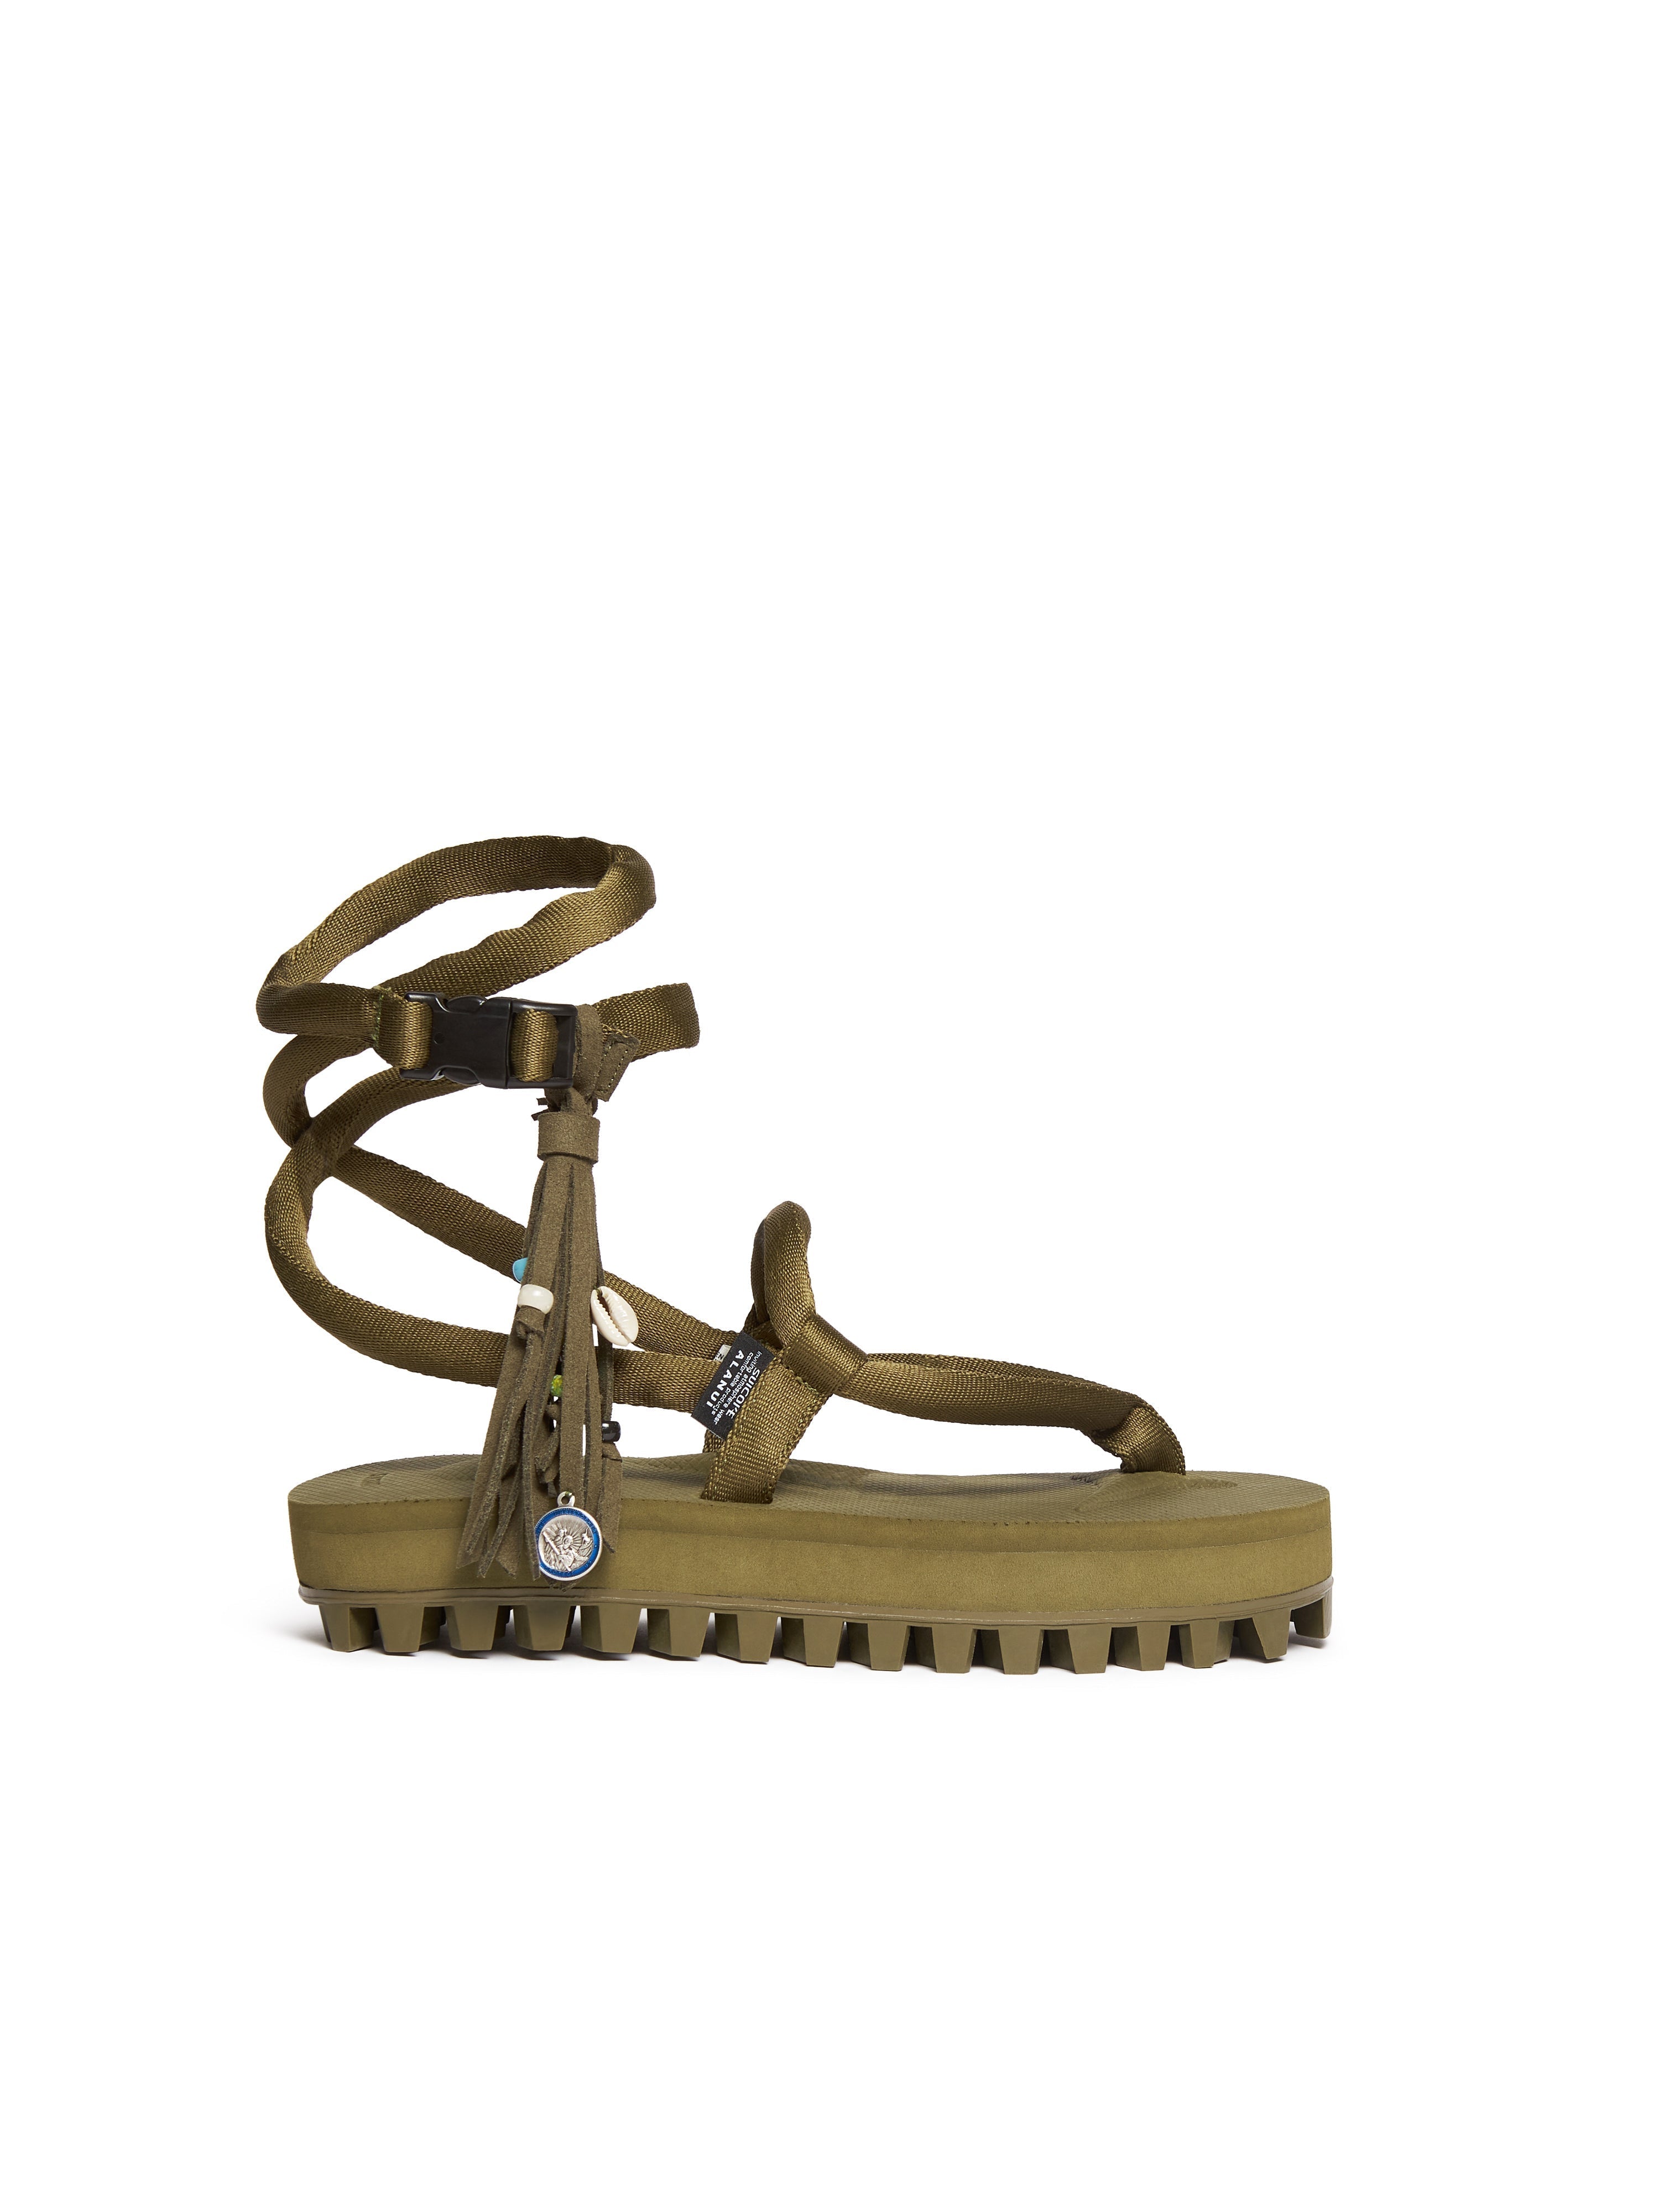 SUICOKE Alanui Edition GUT-HI-ab sandals with Cushioned Nylon Straps w/ Suede Fringe Accents , olive midsole and sole. From Spring/Summer 2022 collection on SUICOKE Official US & Canada Webstore.